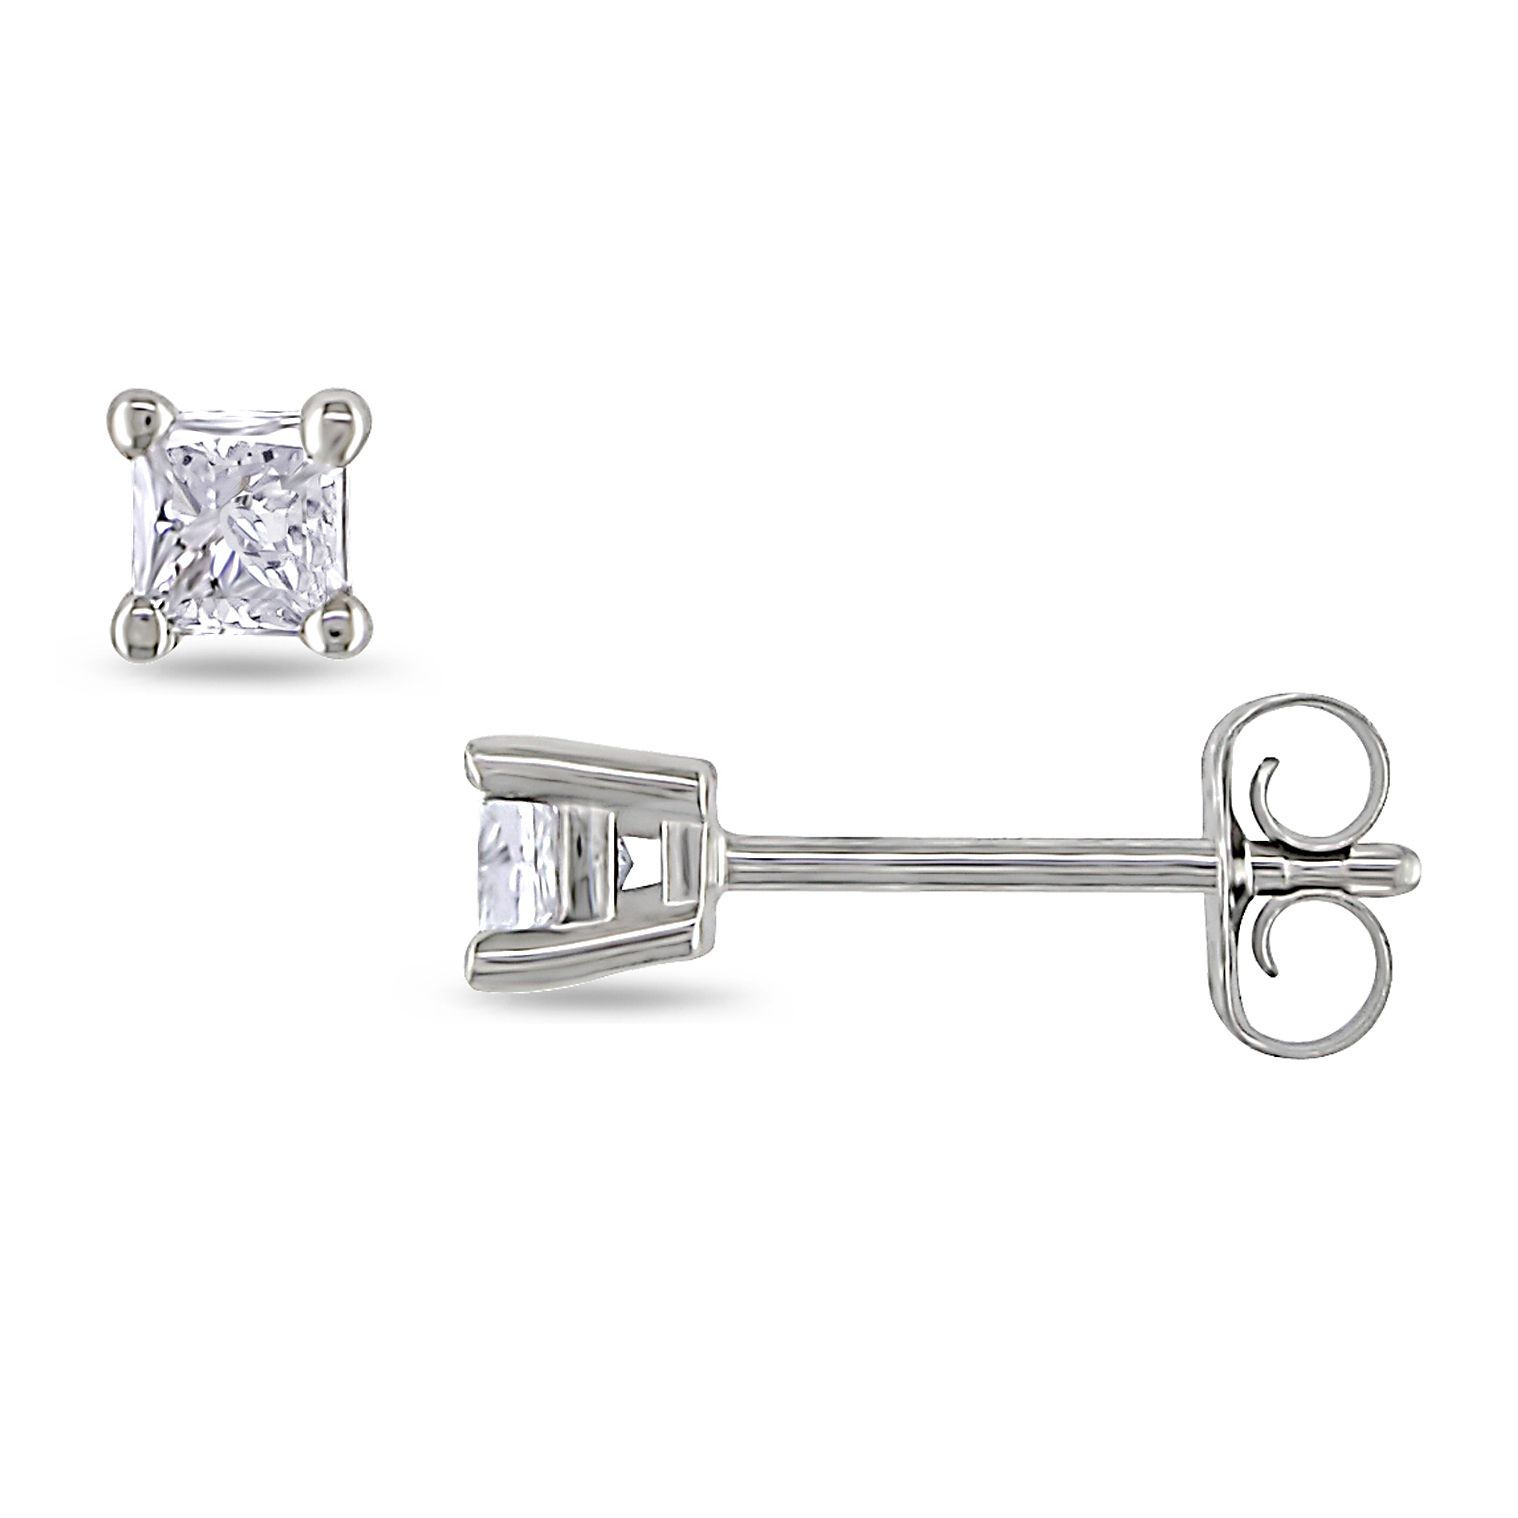 1/4 CT Princess Cut Solitaire Earrings Set in 14K White Gold (IJ I1 I2)